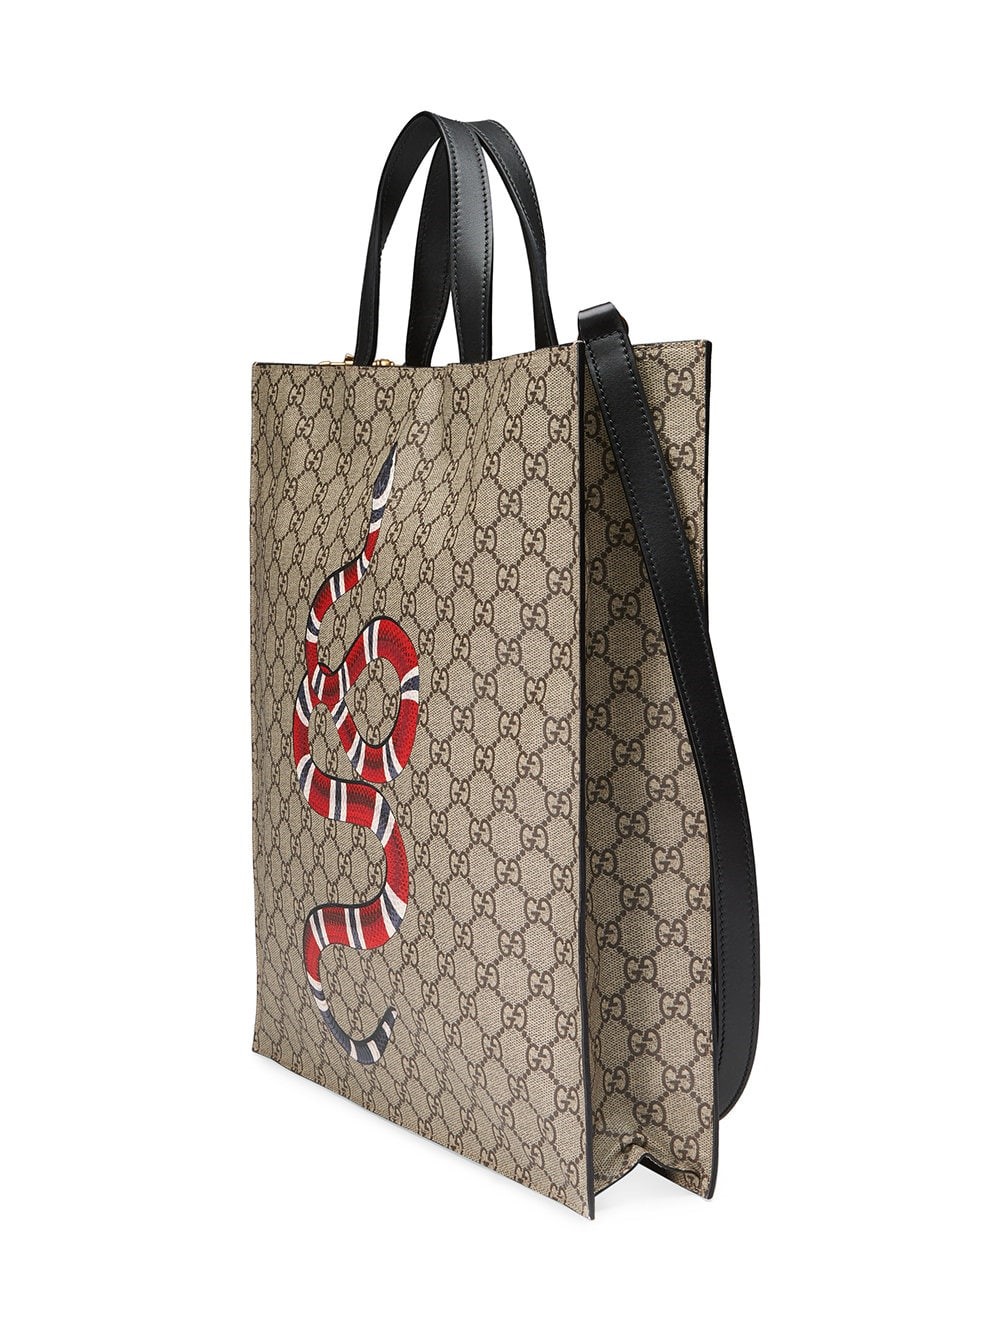 gucci GG PRINT SNAKE TOTE available on 